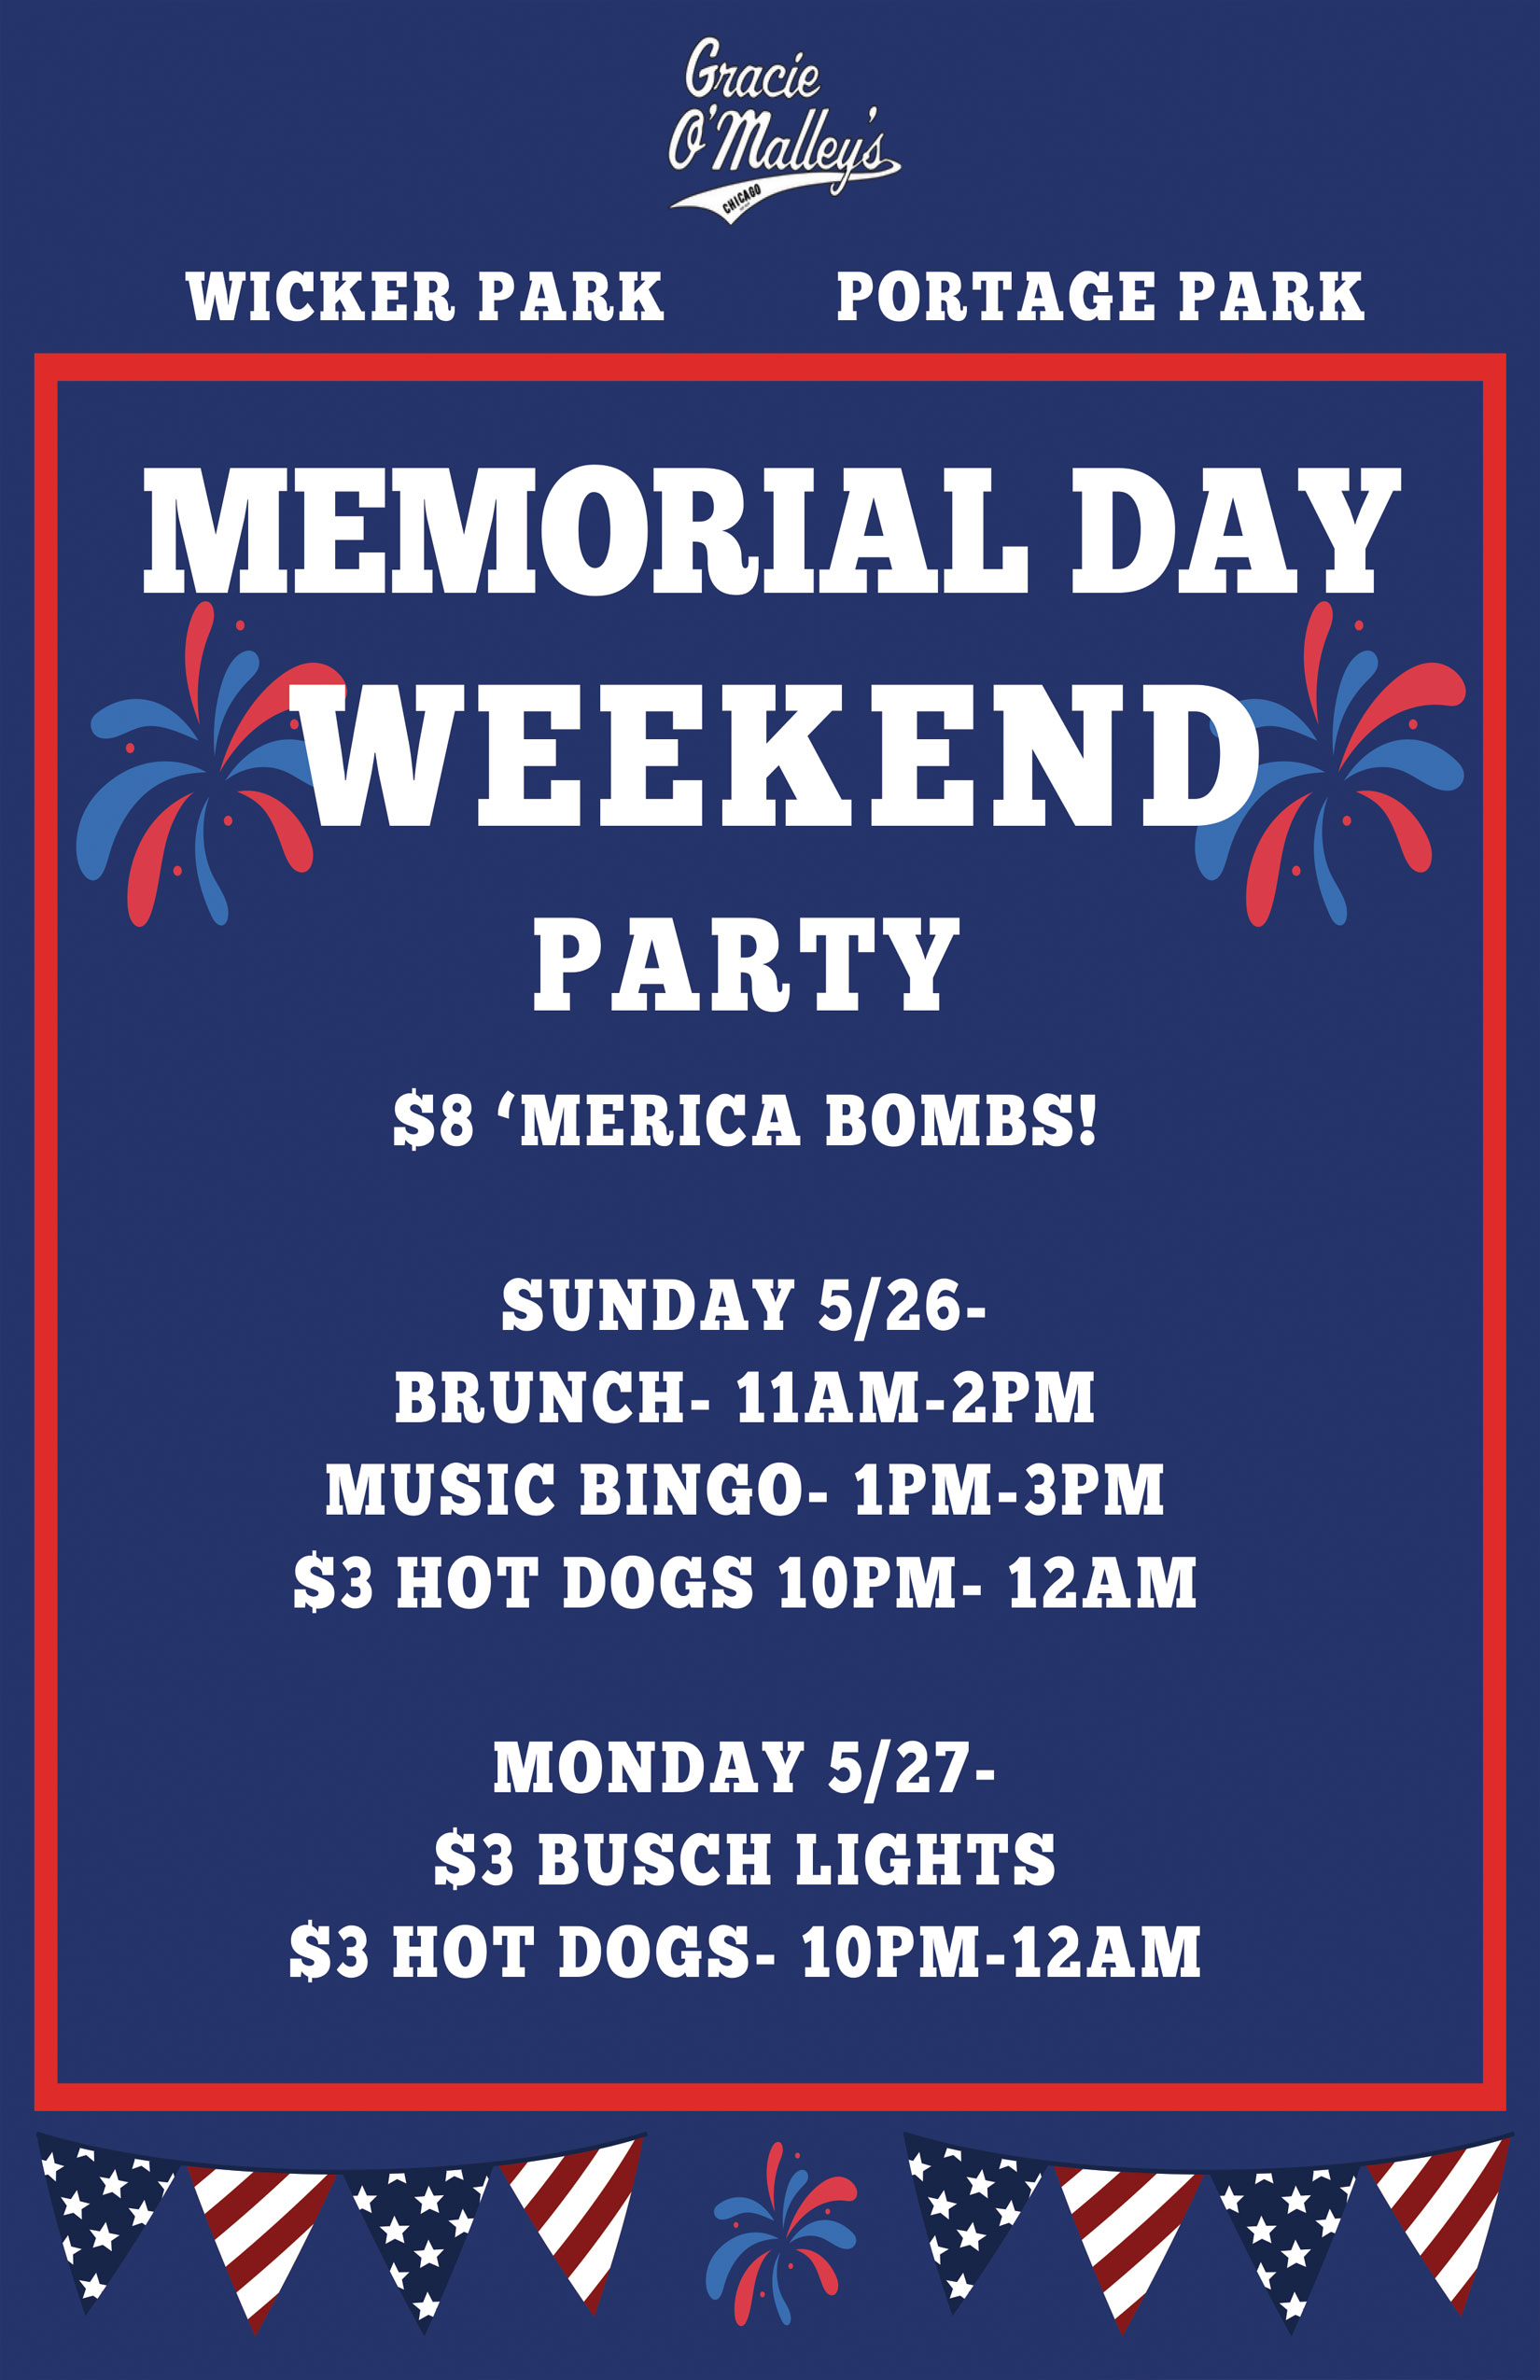 Memorial Day Weekend @ Portage Park and Wicker Park